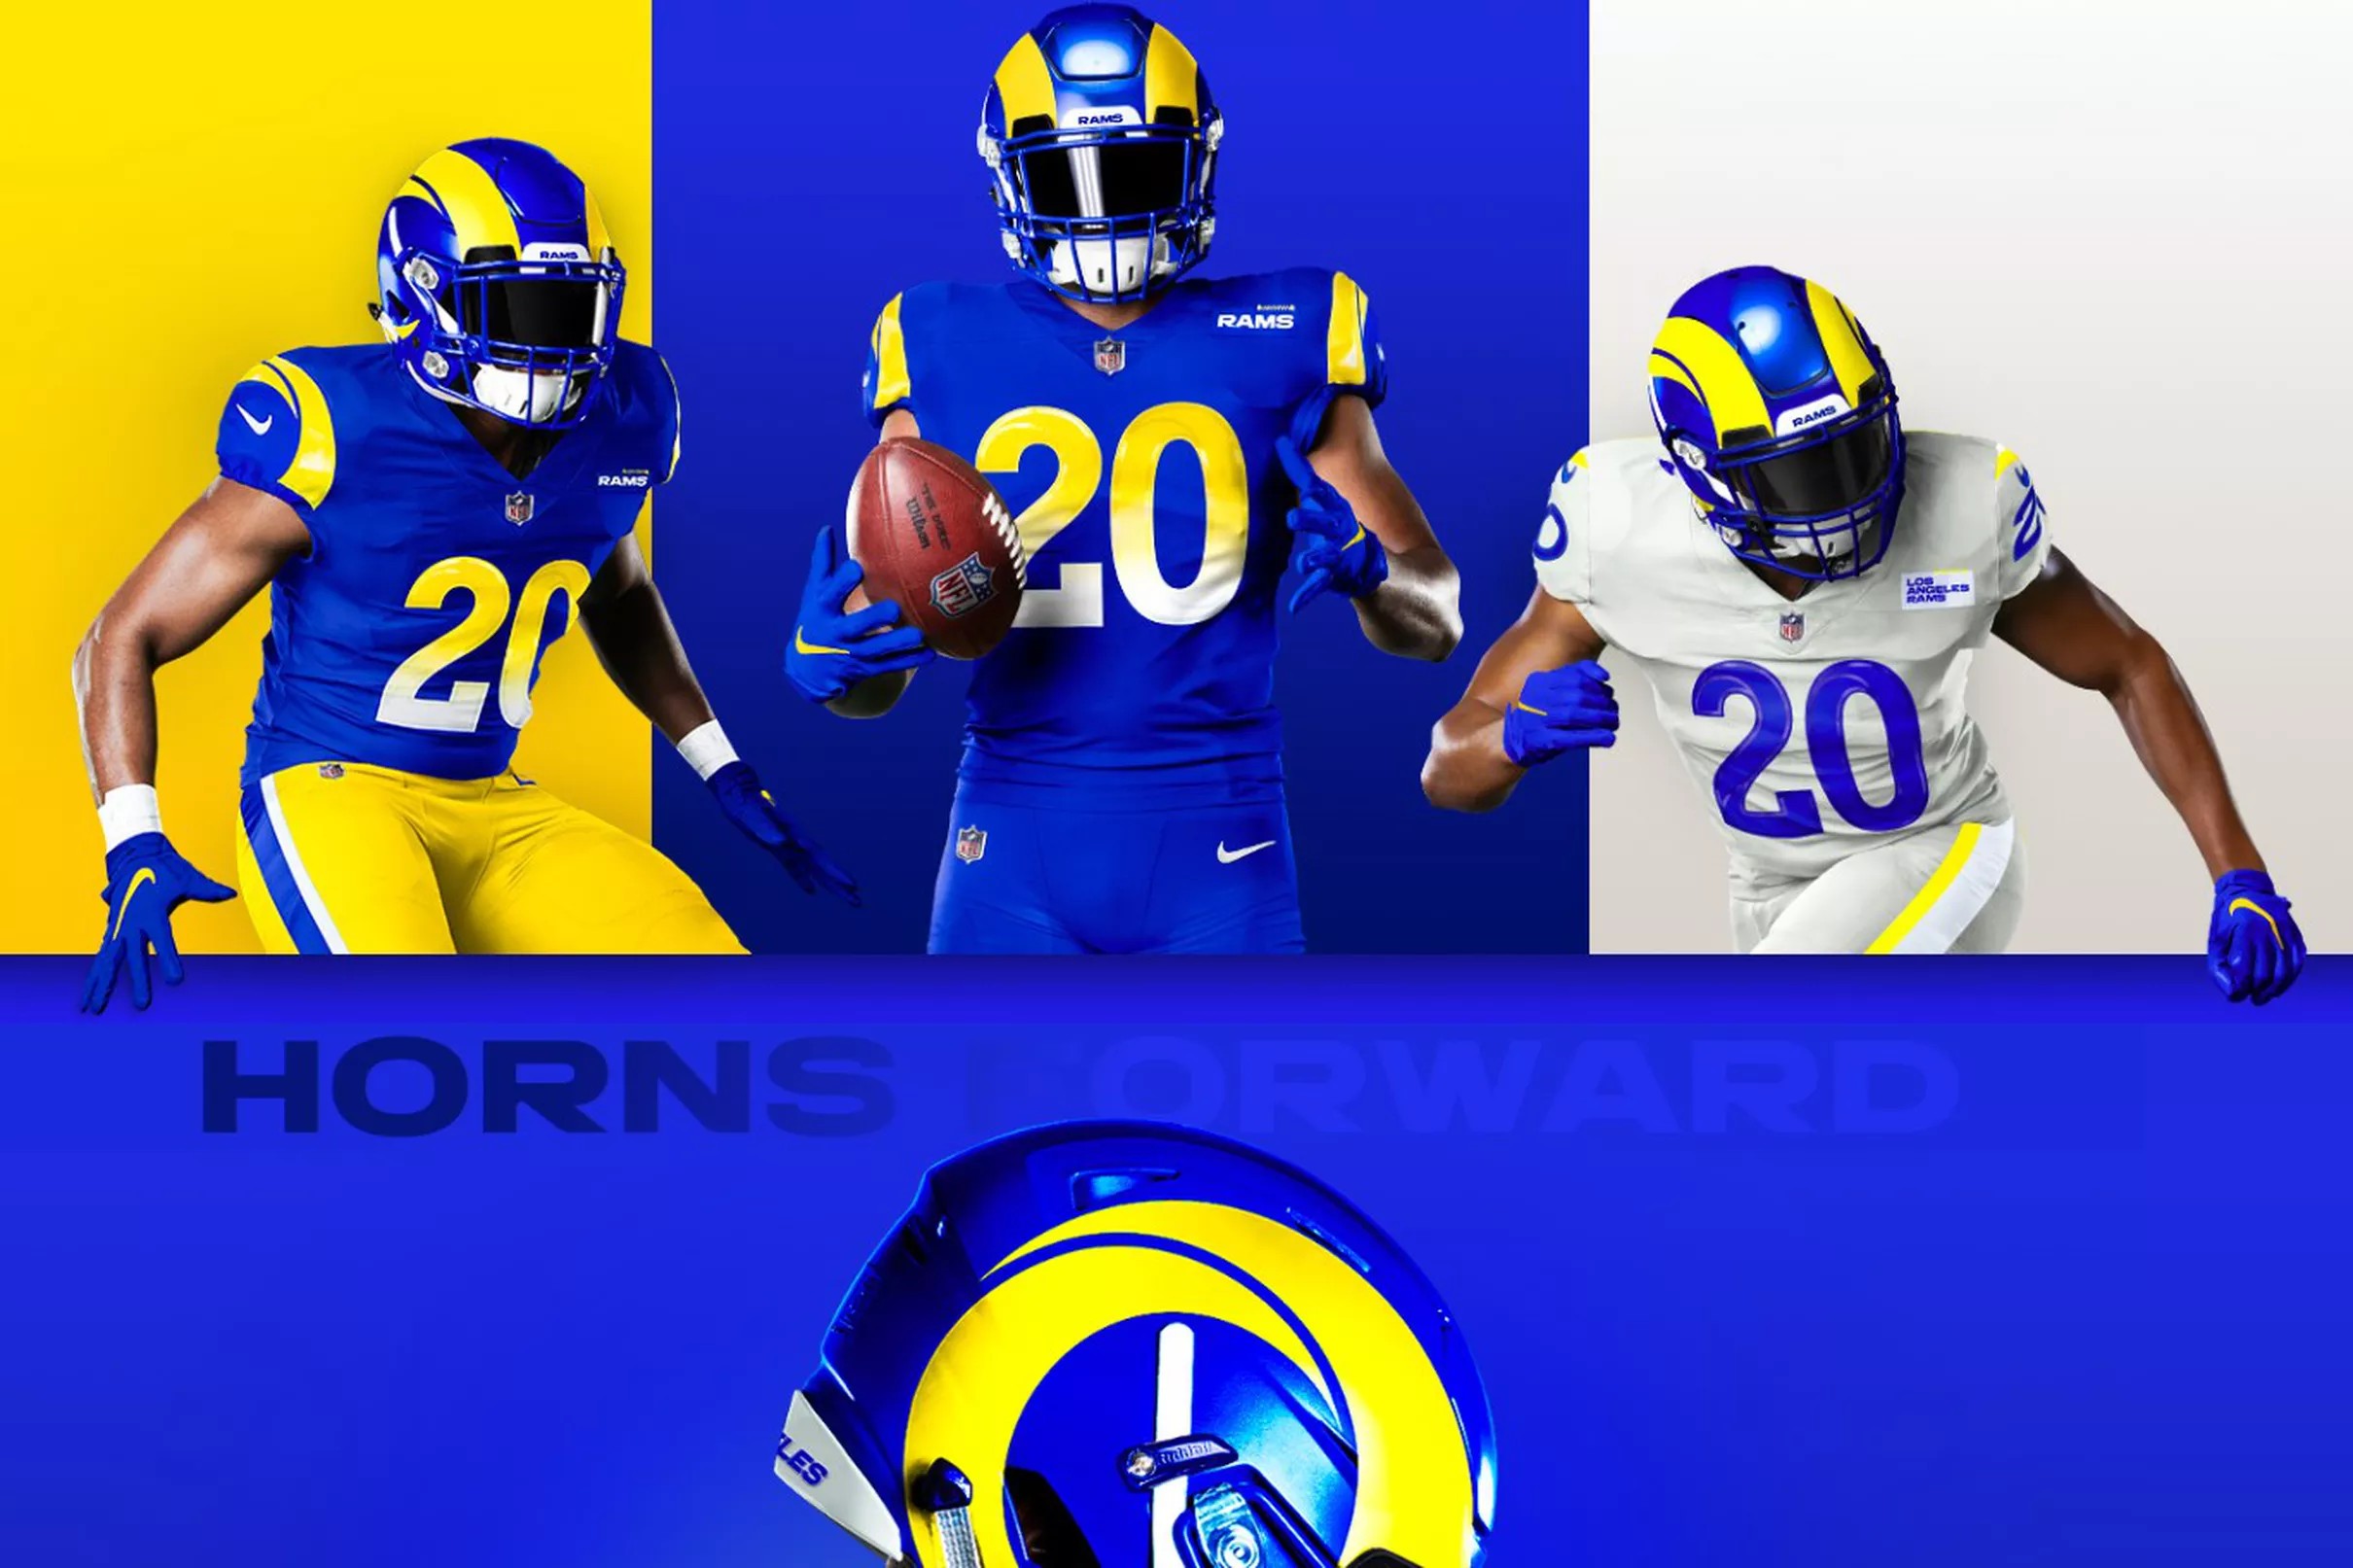 Why did the Rams logo and uniform re-designs get received so